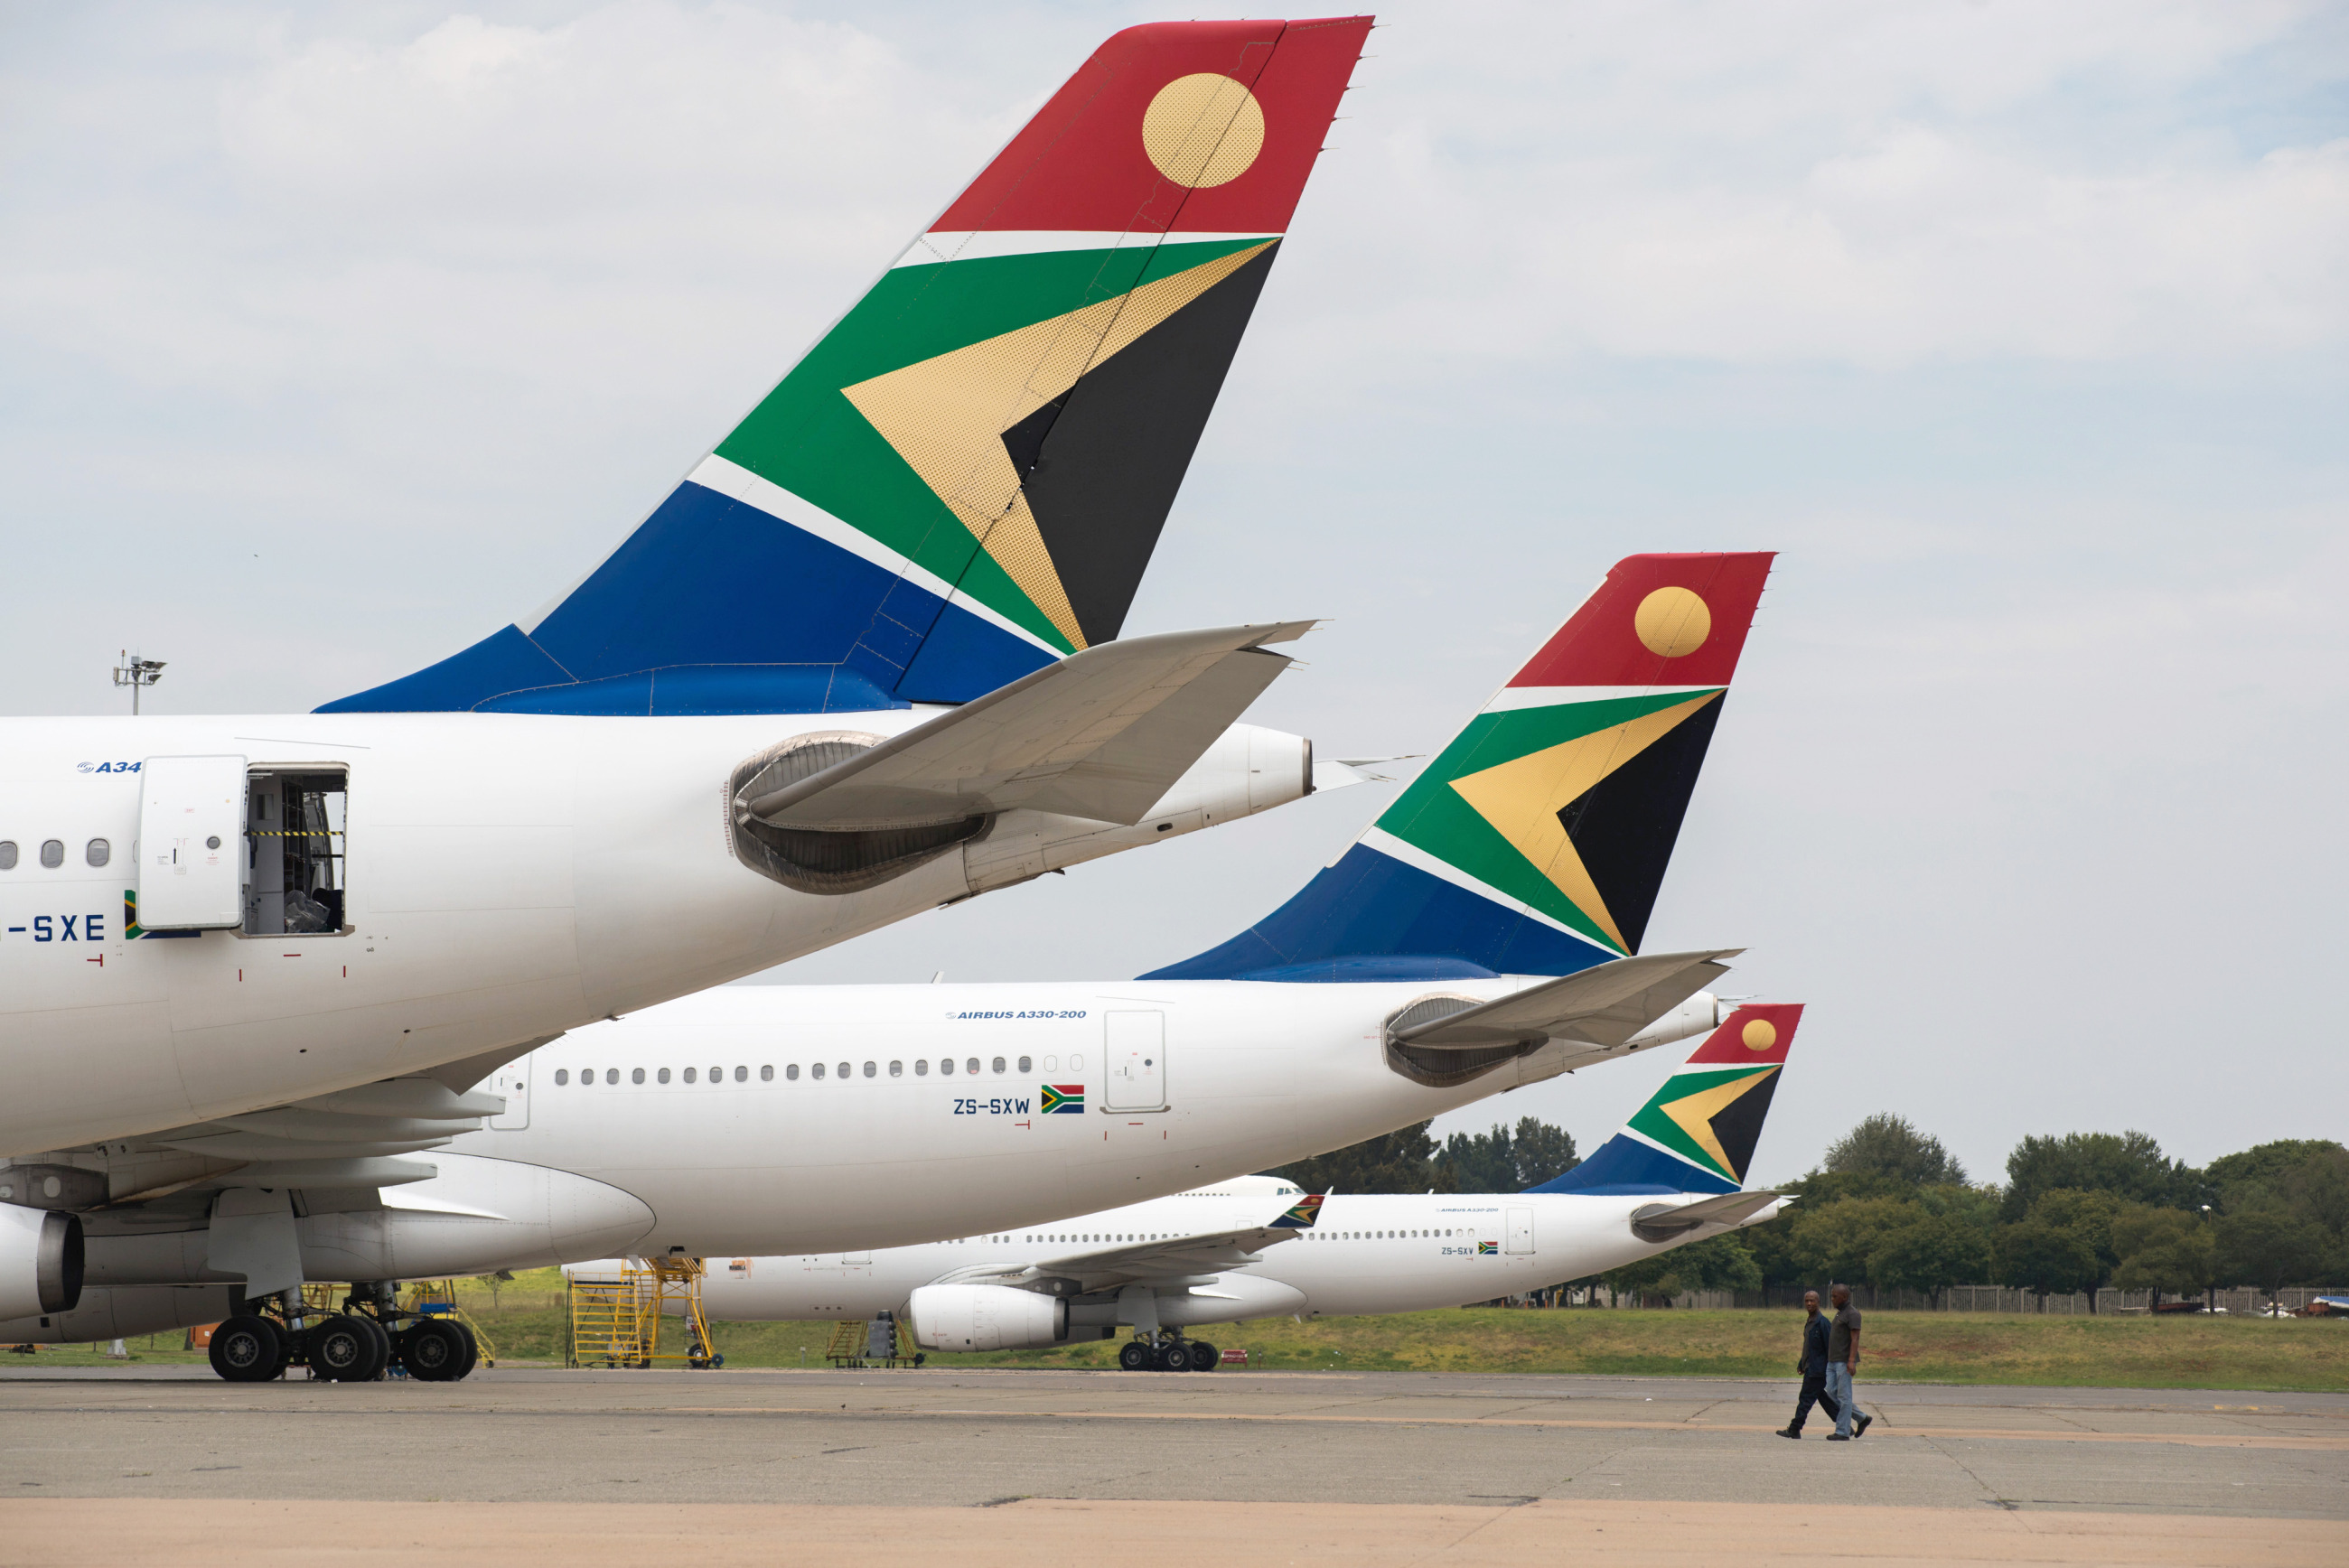 South African Airways aircraft sit at O.R. Tambo International airport in Johannesburg.